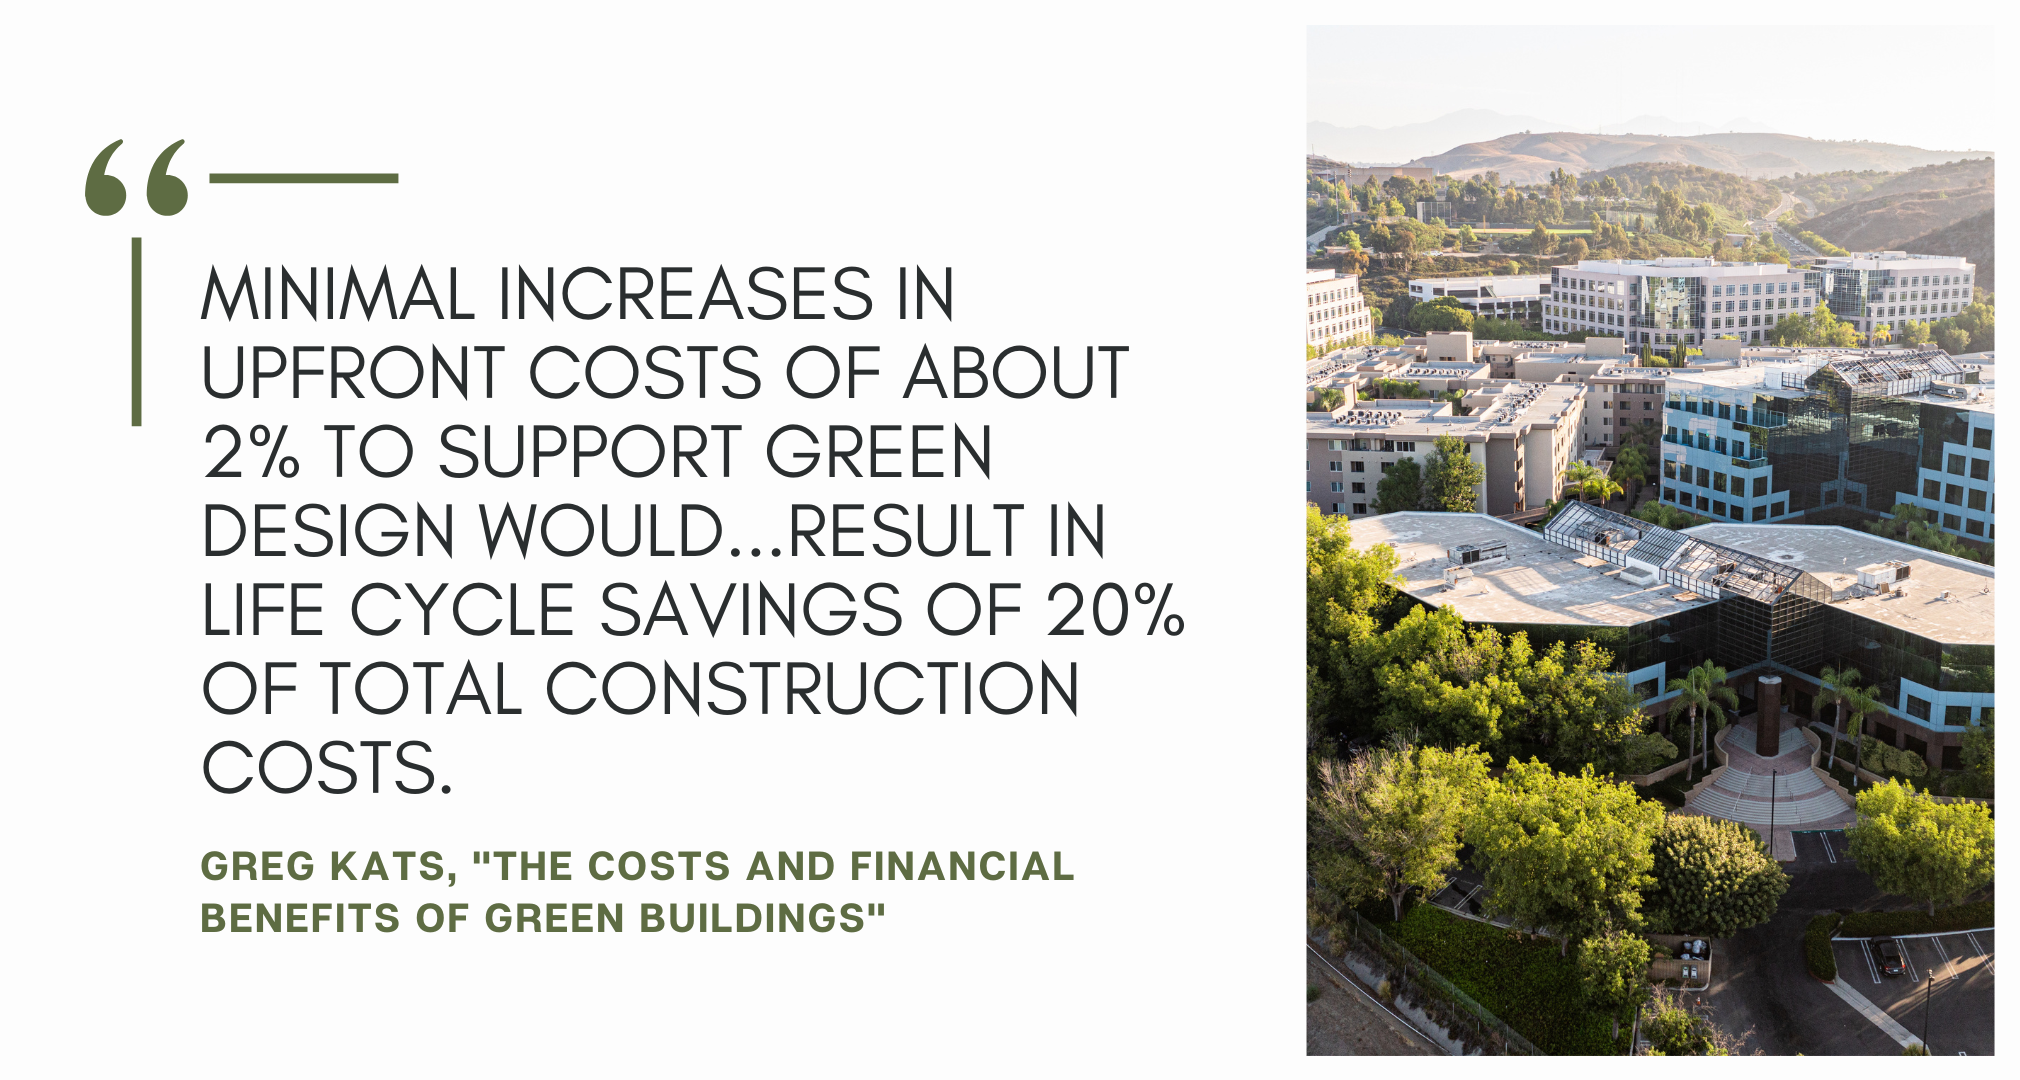 lifetime savings far outweigh upfront costs of green construction